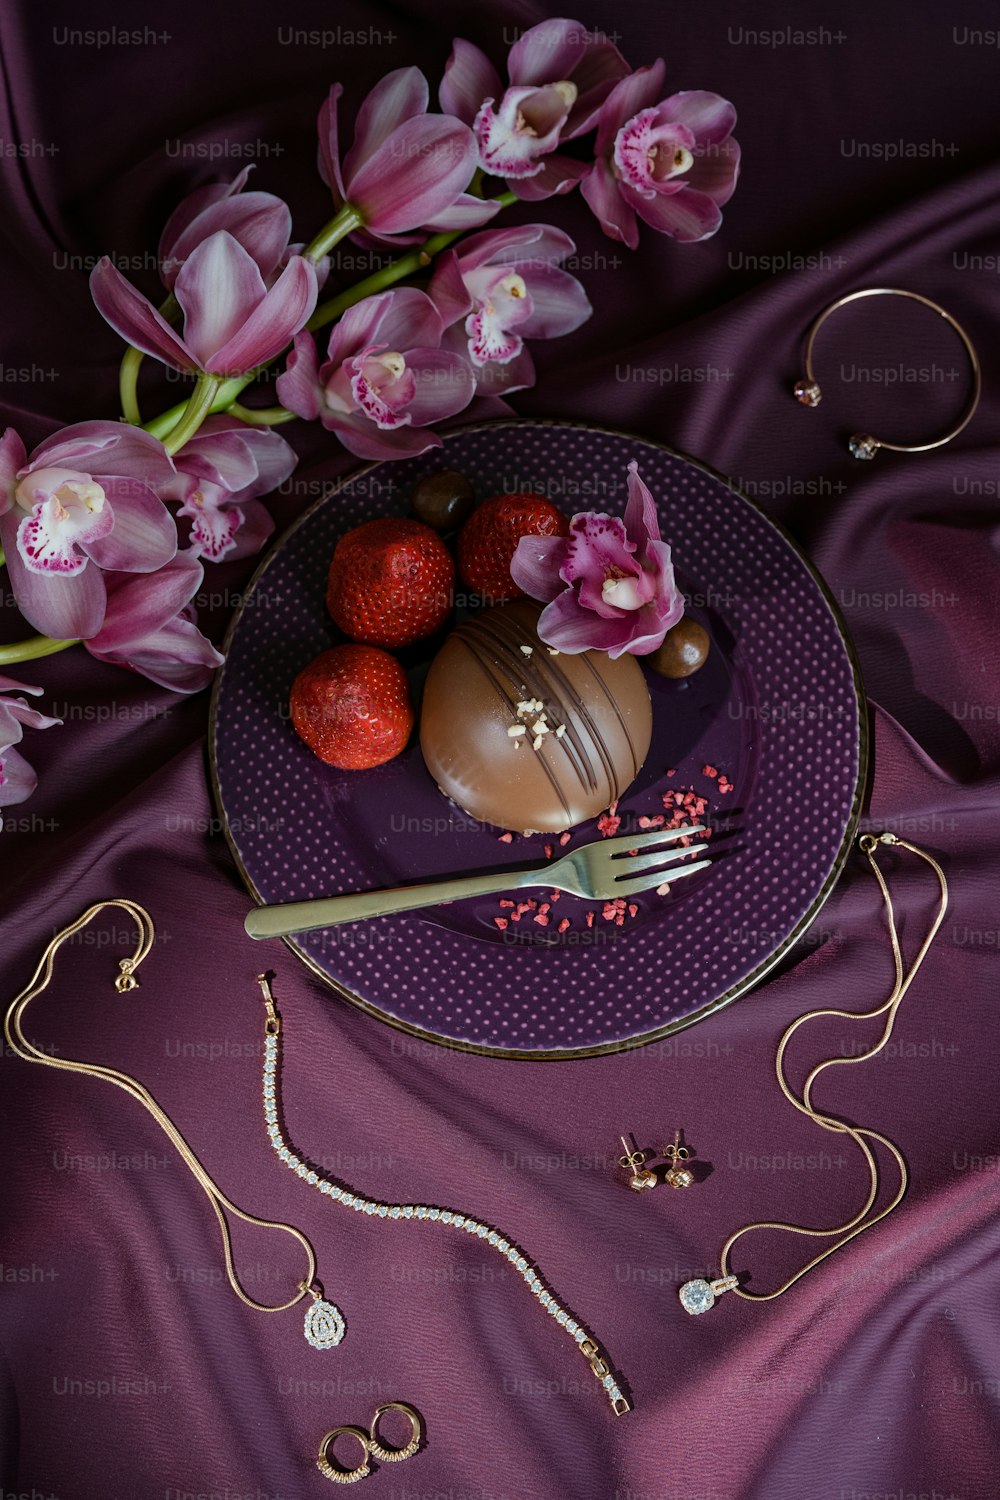 a plate with a chocolate dessert and flowers on it